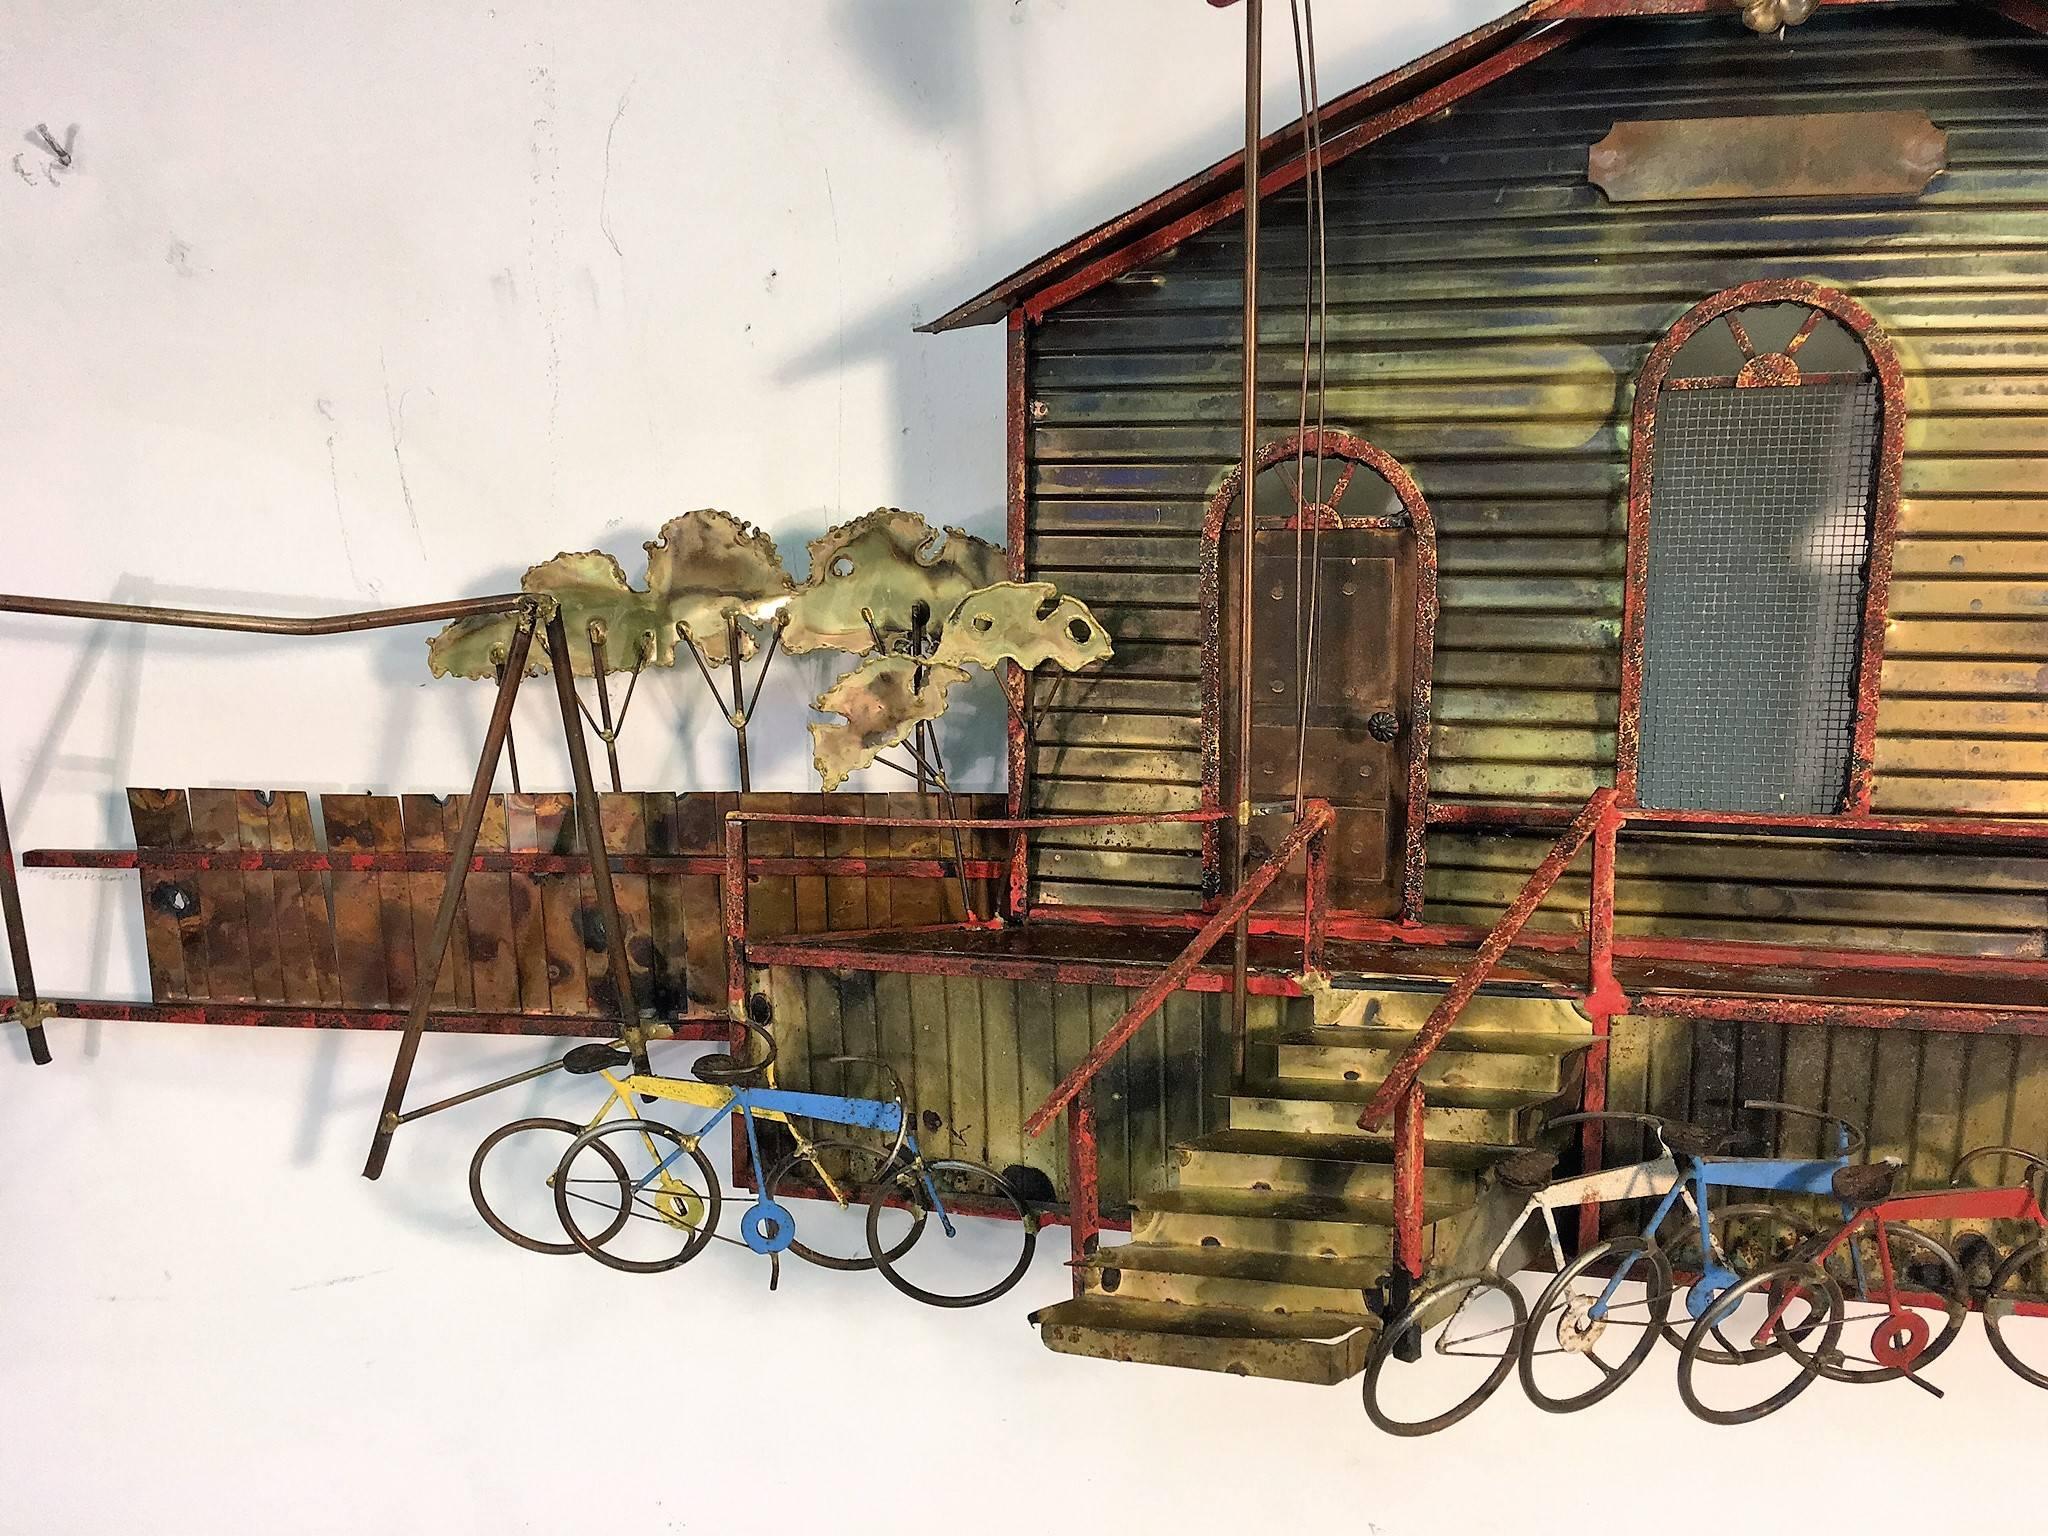 Intricate mixed metal and materials enameled and torch cut schoolhouse with American flag on pole and ringing school bell. Great detail with blue, yellow and red bicycles in front on both sides of the stairway. Pair of red picnic tables, fence and